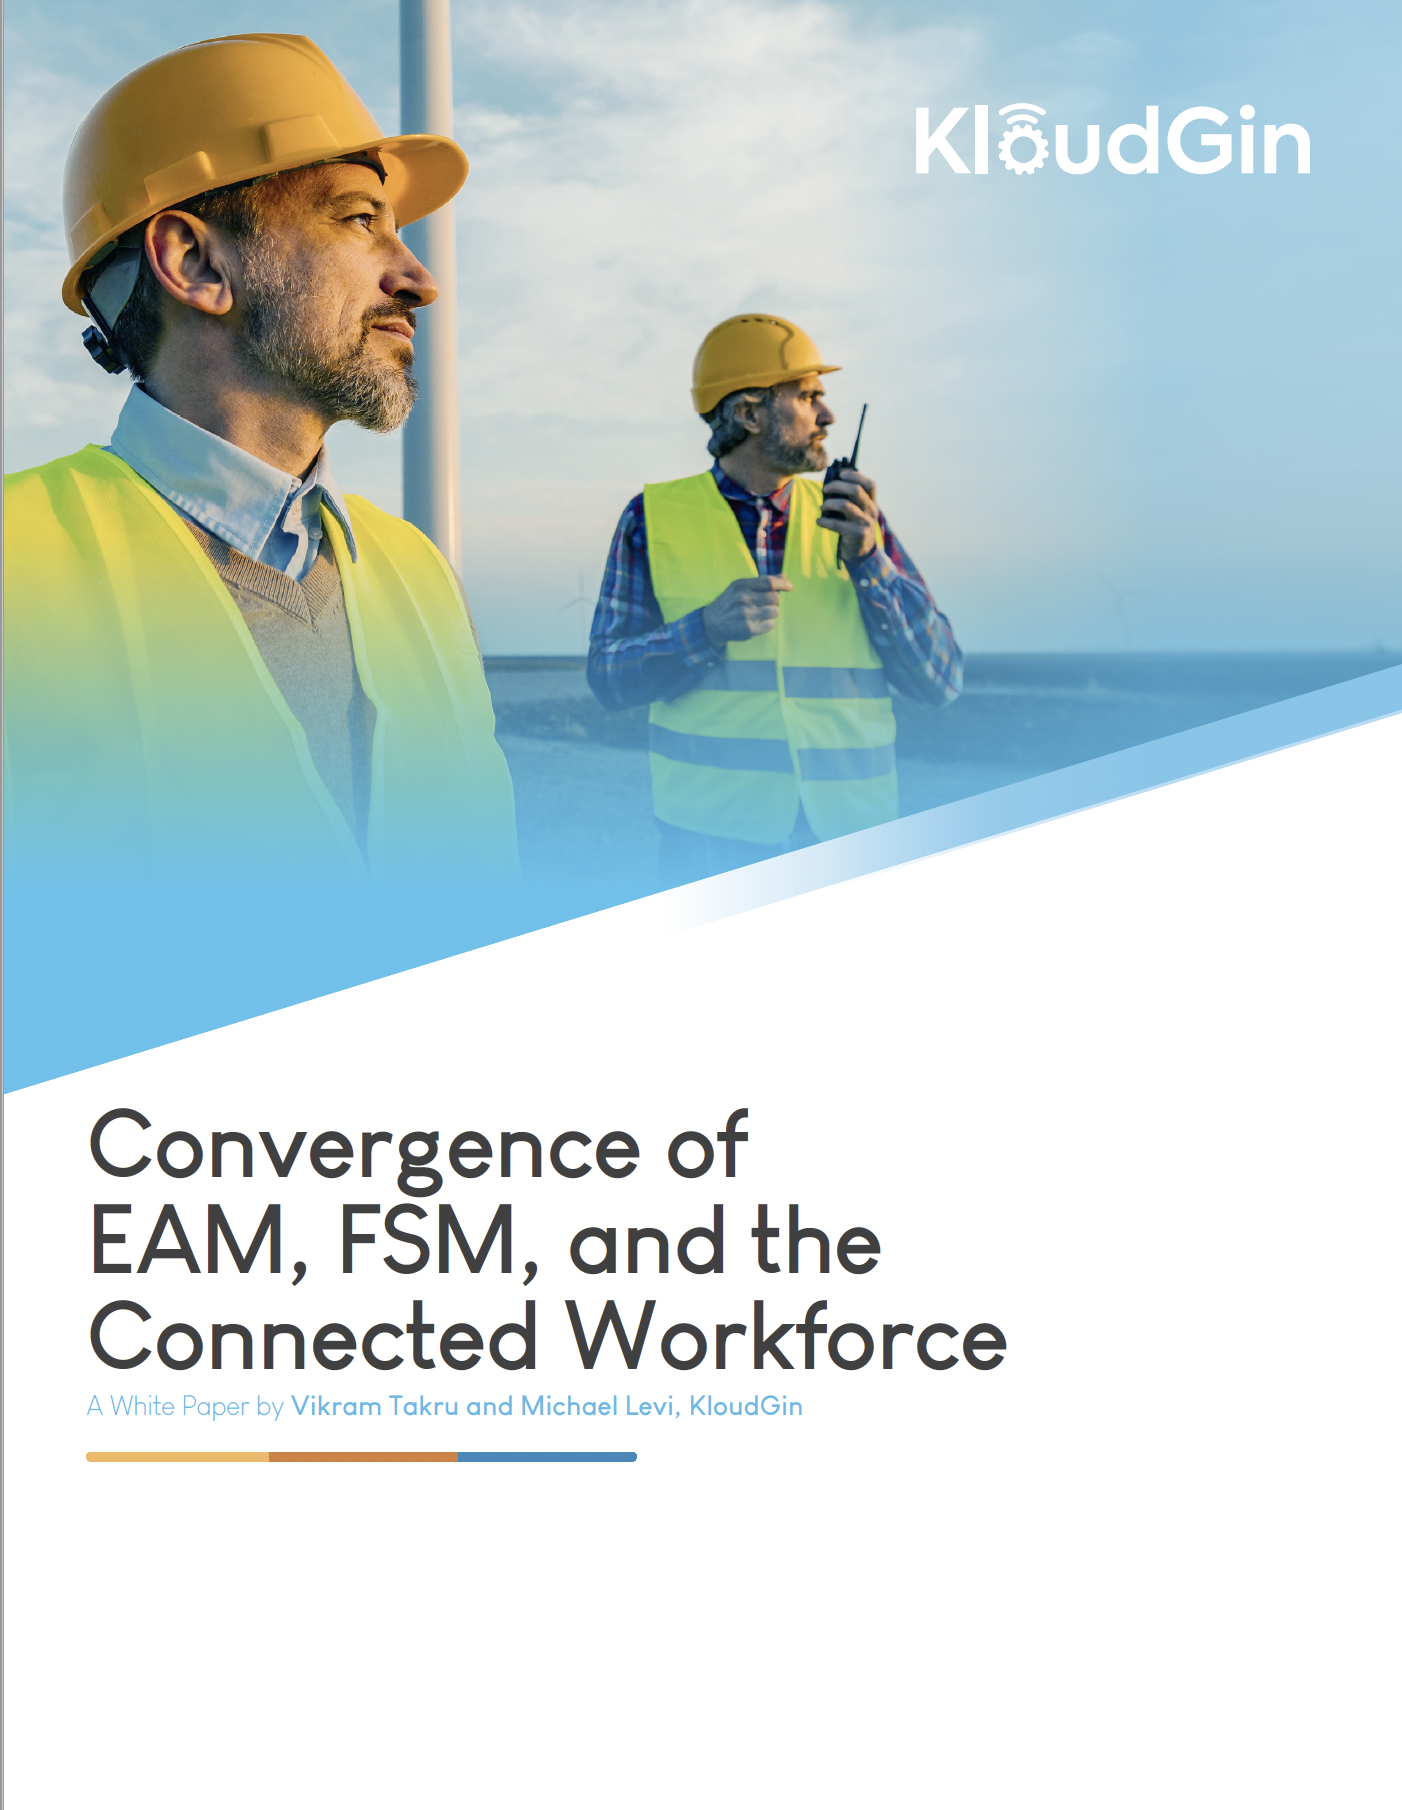 Convergence of EAM, FSM, and the Connected Workforce